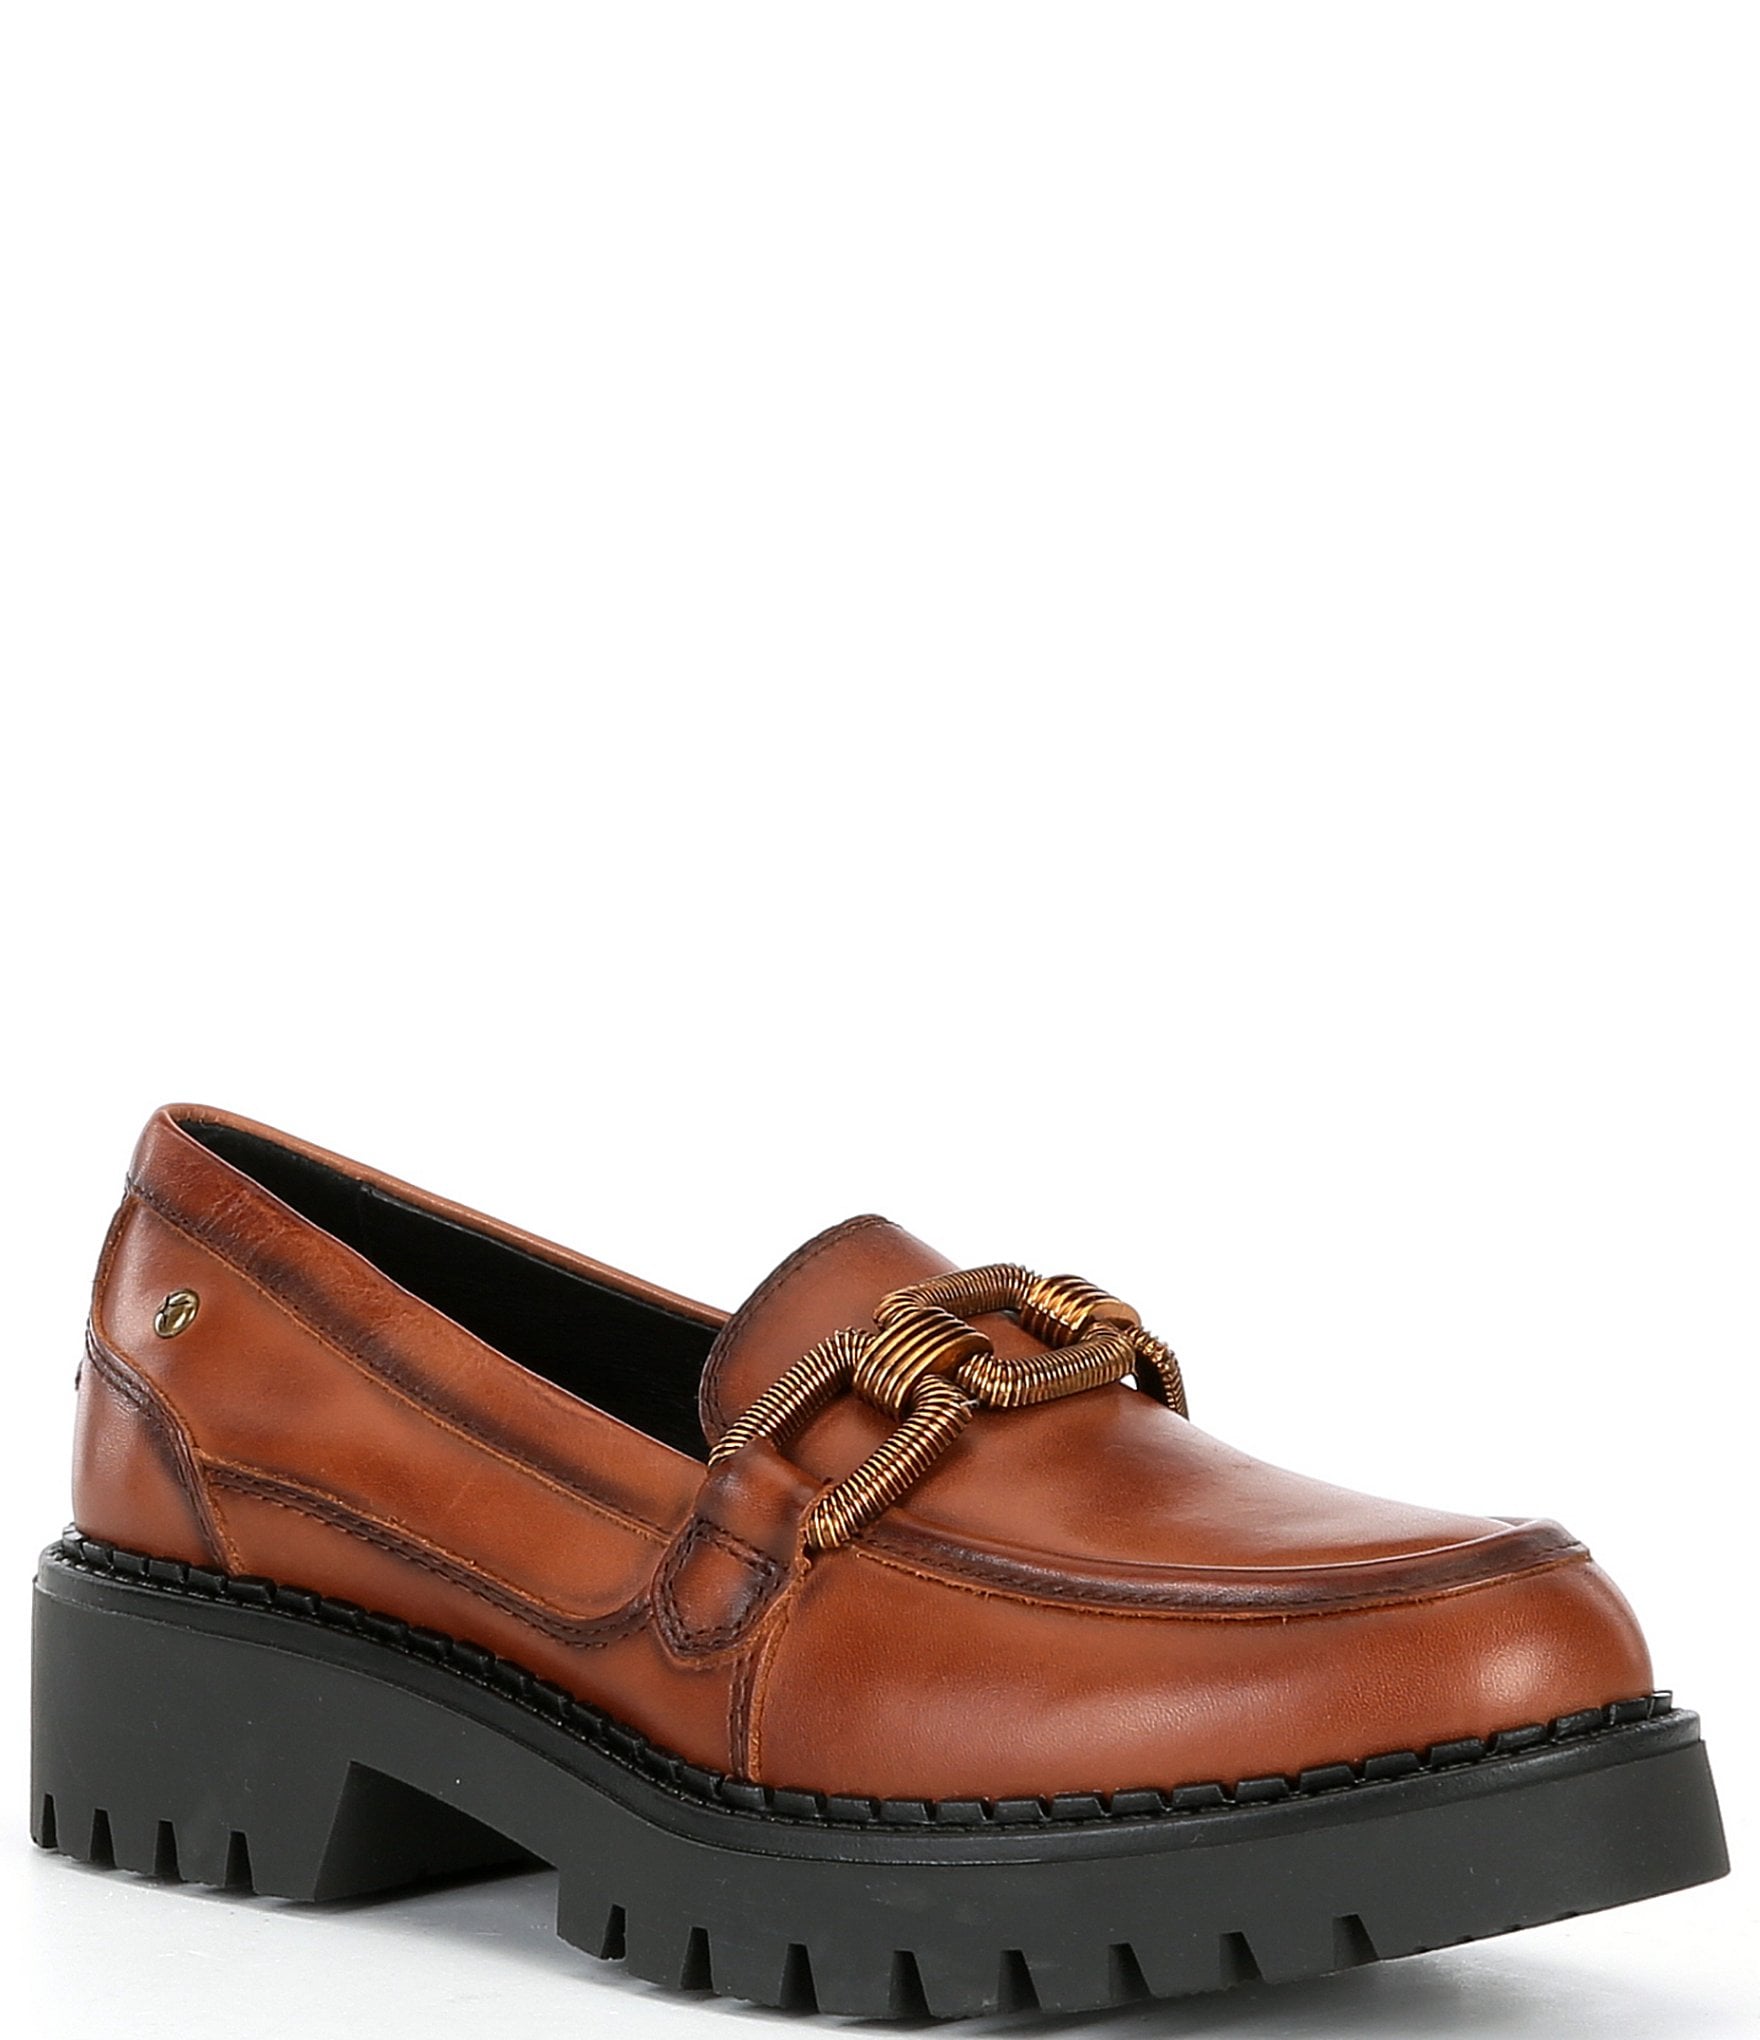 Pikolinos Aviles Lugg Leather Loafers | Dillard's